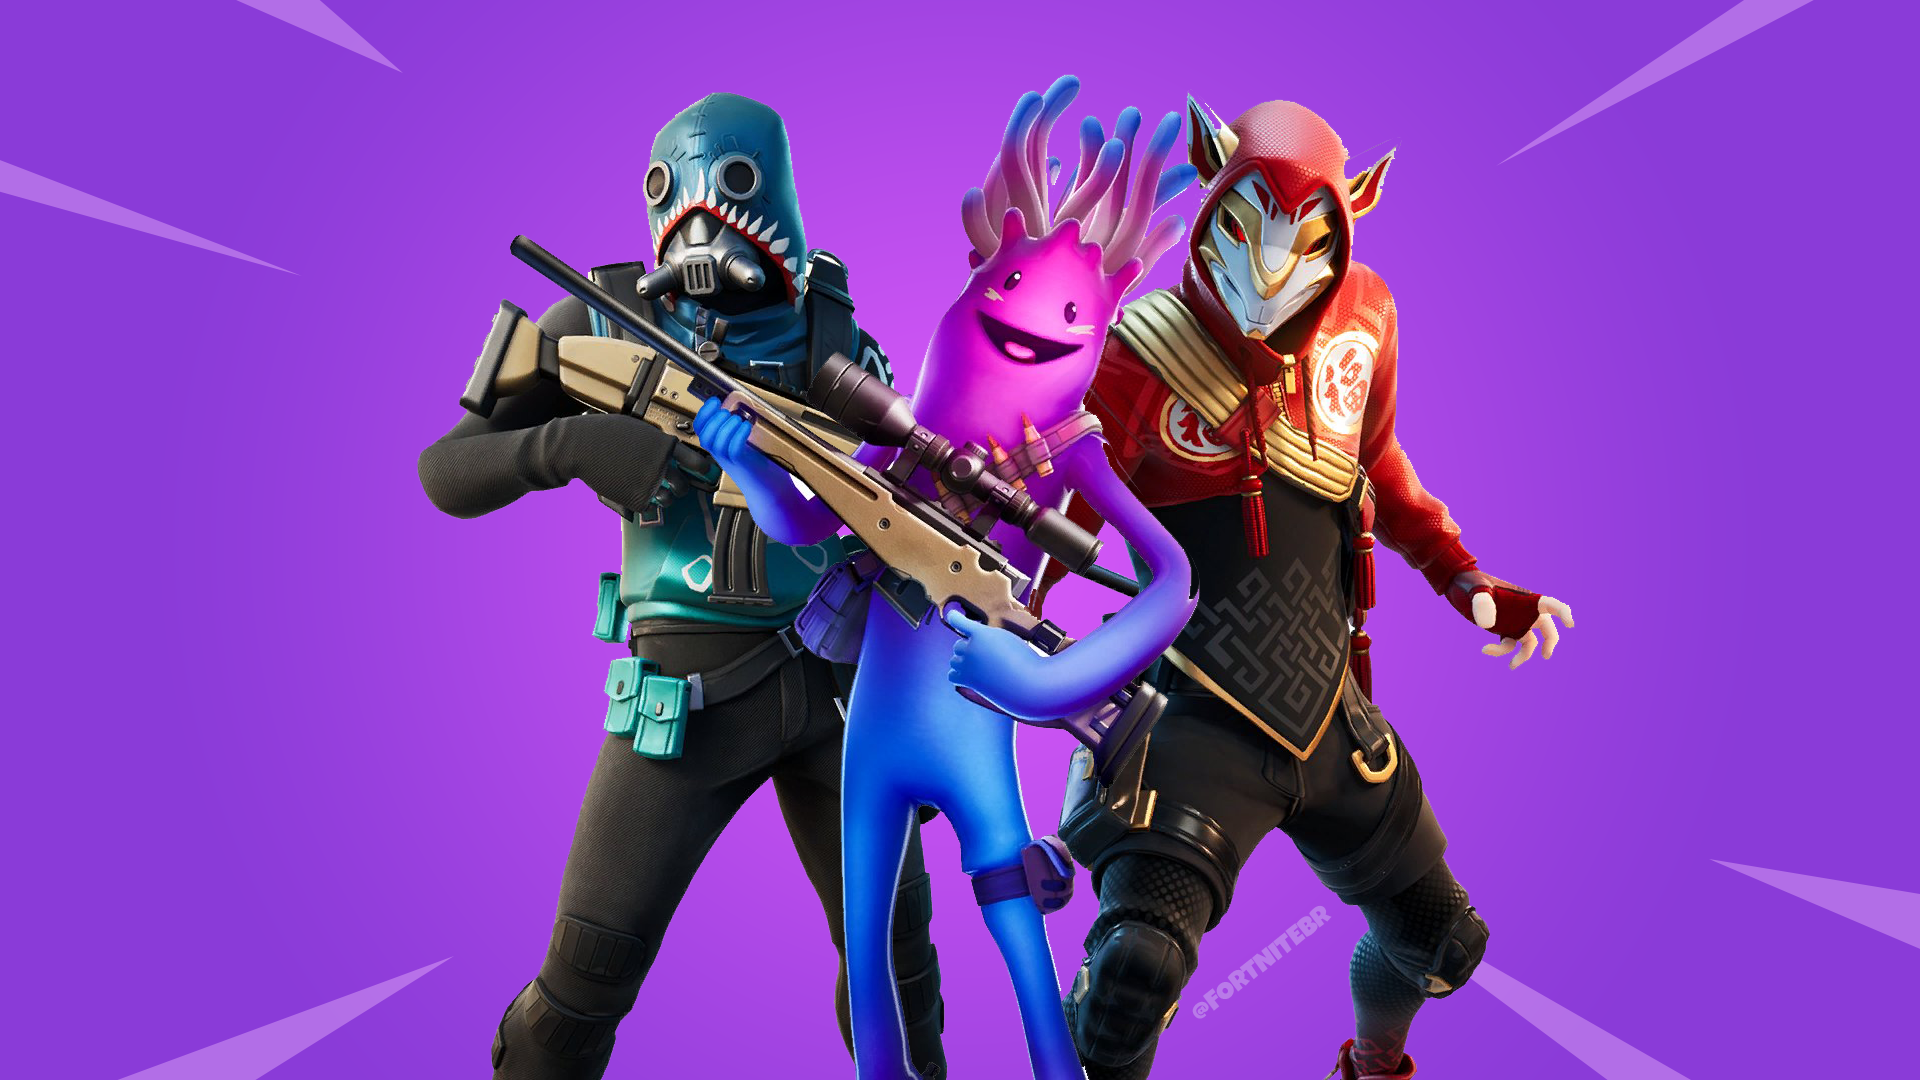 Fortnite Patch v11.40 - All Leaked Cosmetics (Skins, Emotes, Gliders, Wraps...